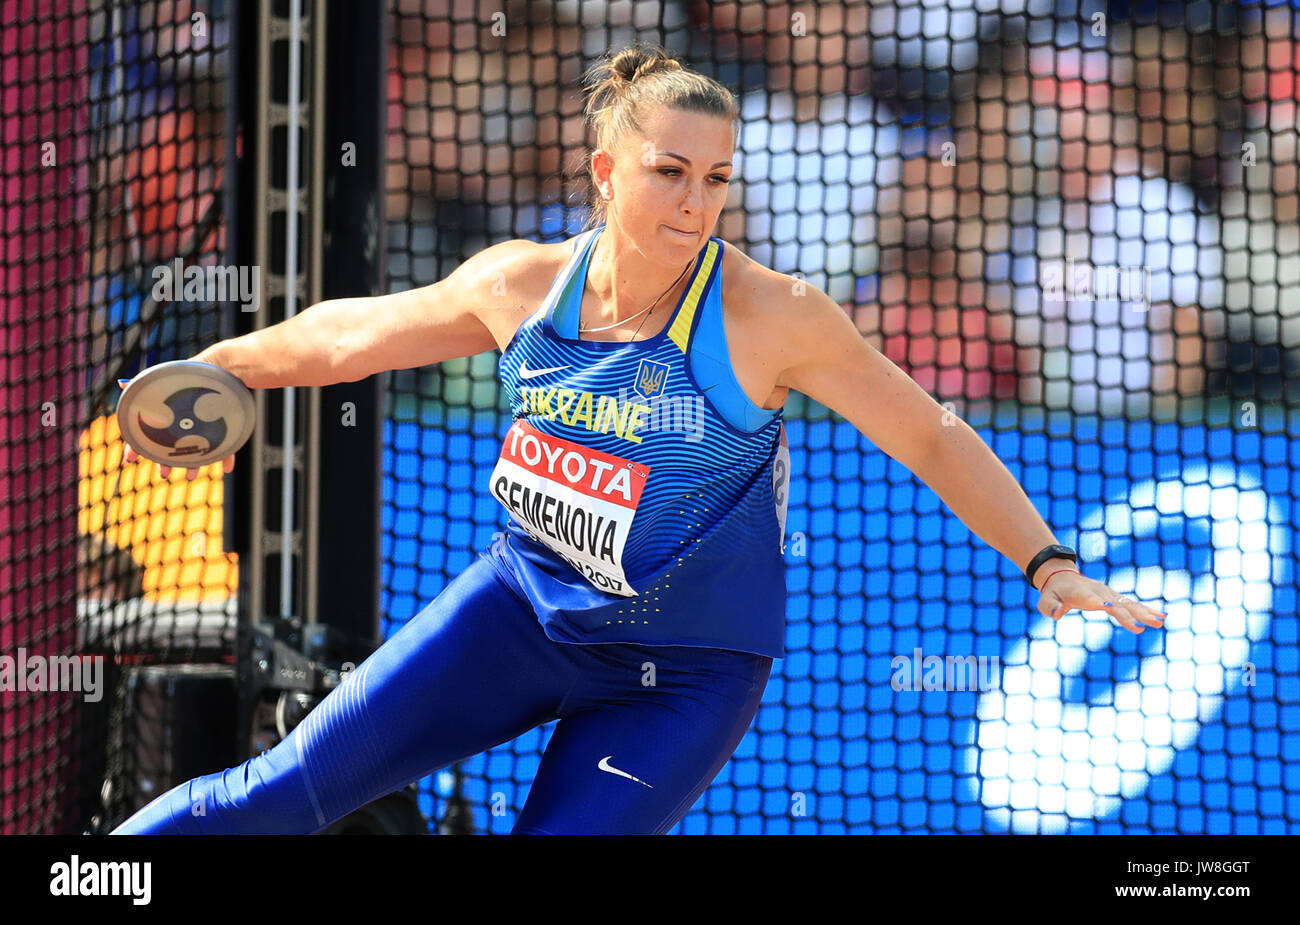 Ukraine's Natalia Semenova competes in the Women's Discus Throw Qualifying during day eight of the 2017 IAAF World Championships at the London Stadium Stock Photo